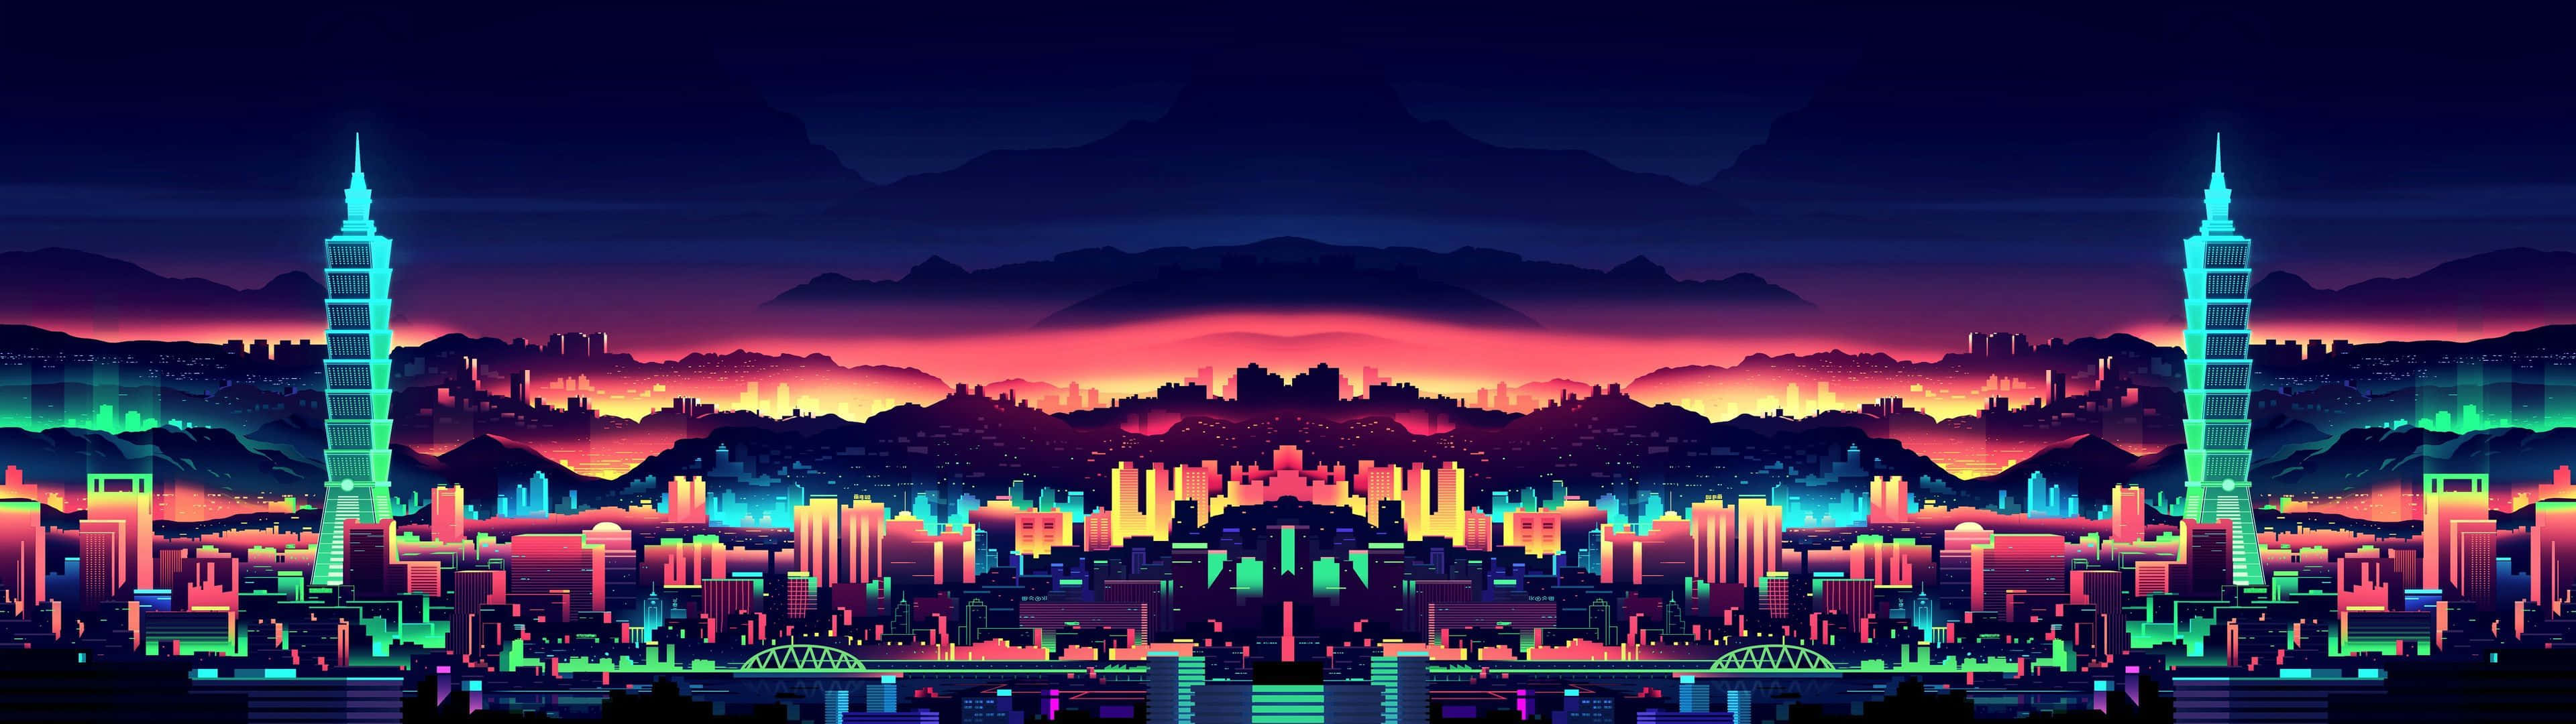 A Colorful City With Neon Lights In The Background